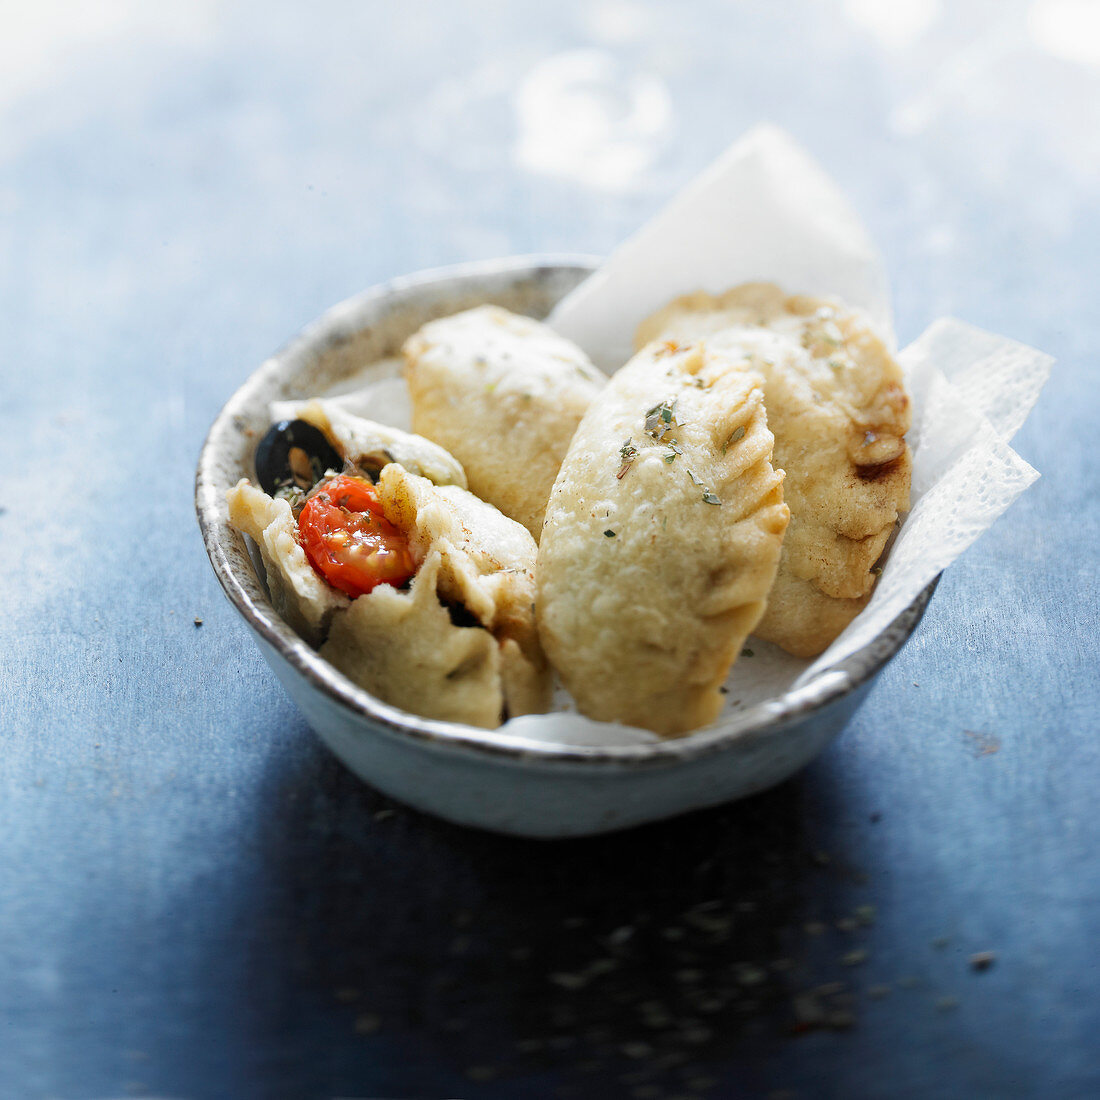 Tomato,olive and anchovy turnover